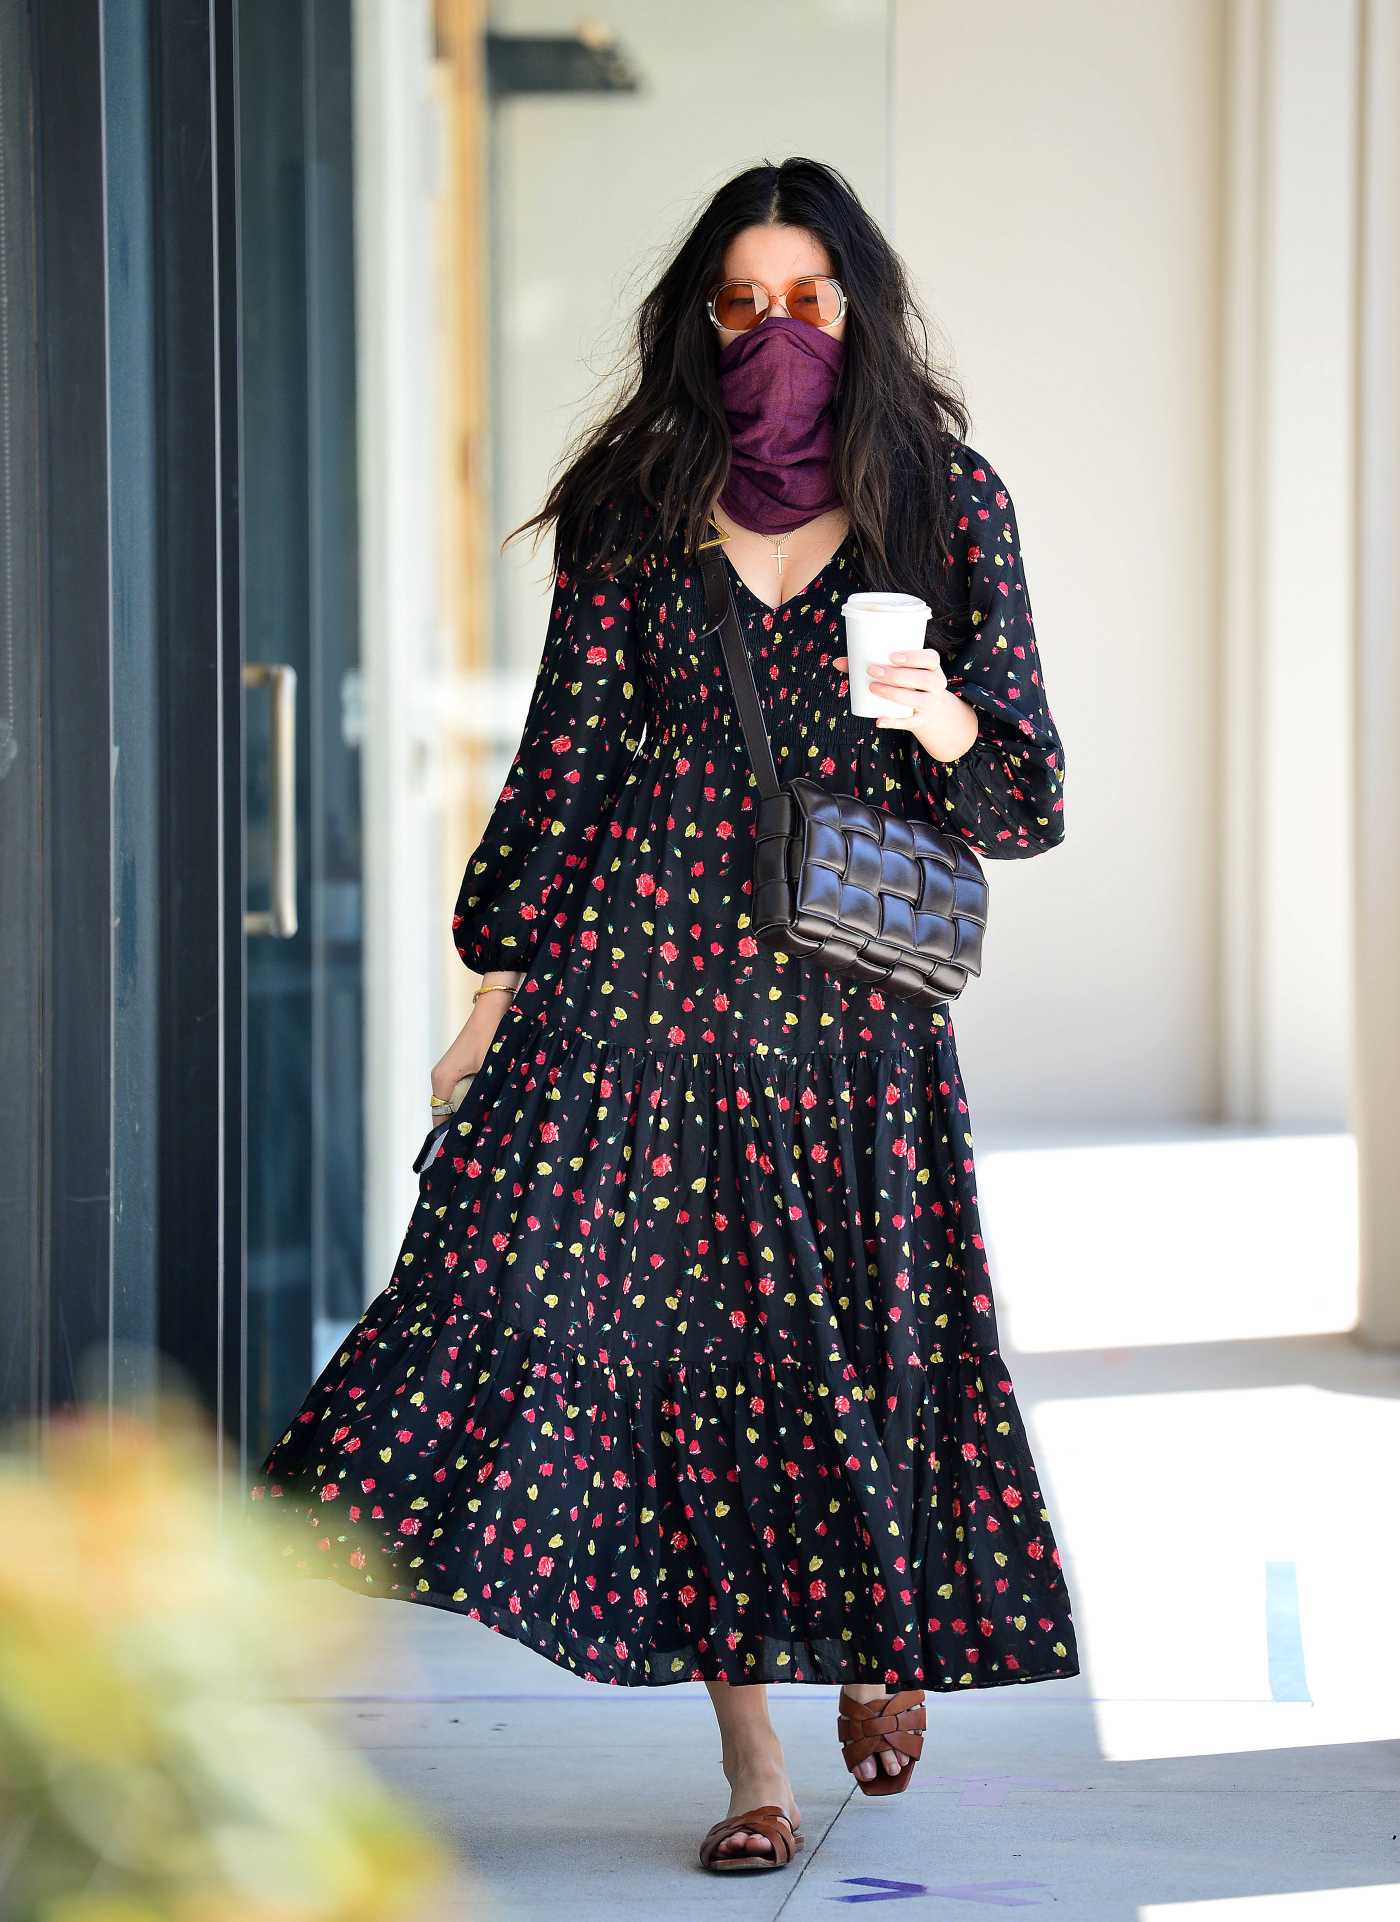 Jessica Gomes in a Black Floral Print Dress Was Seen Out in Los Angeles 05/28/2020